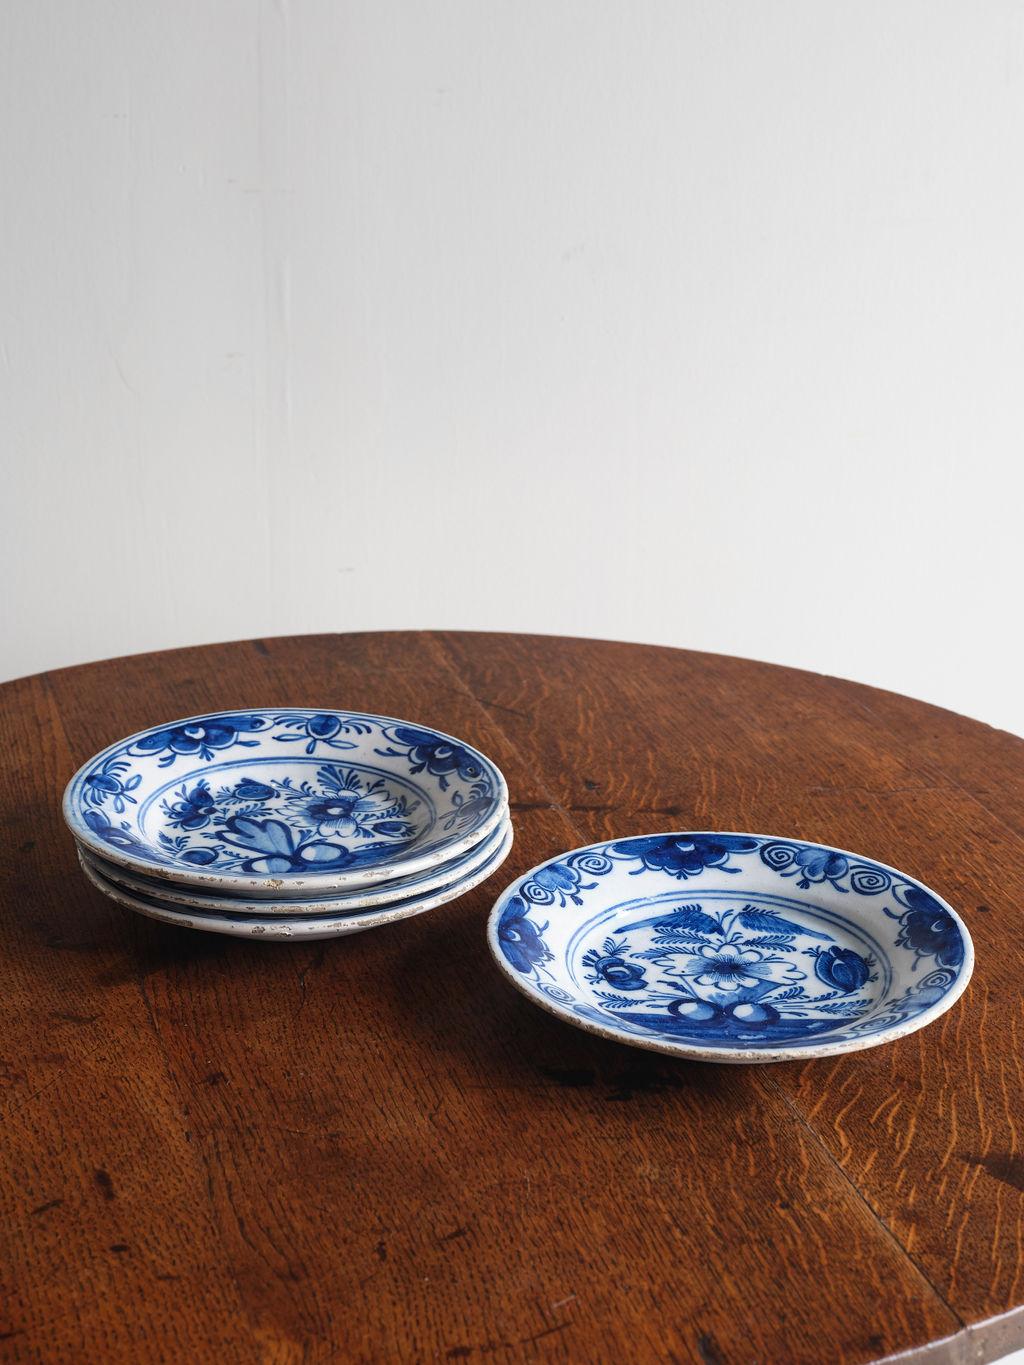 These sets of Delft Dutch plates would be a lovely addition to a dining room or would make beautiful decorations displayed on a wall or resting on a buffet or credenza. There are 4 plates total, and they do all have minor chips and scratches because